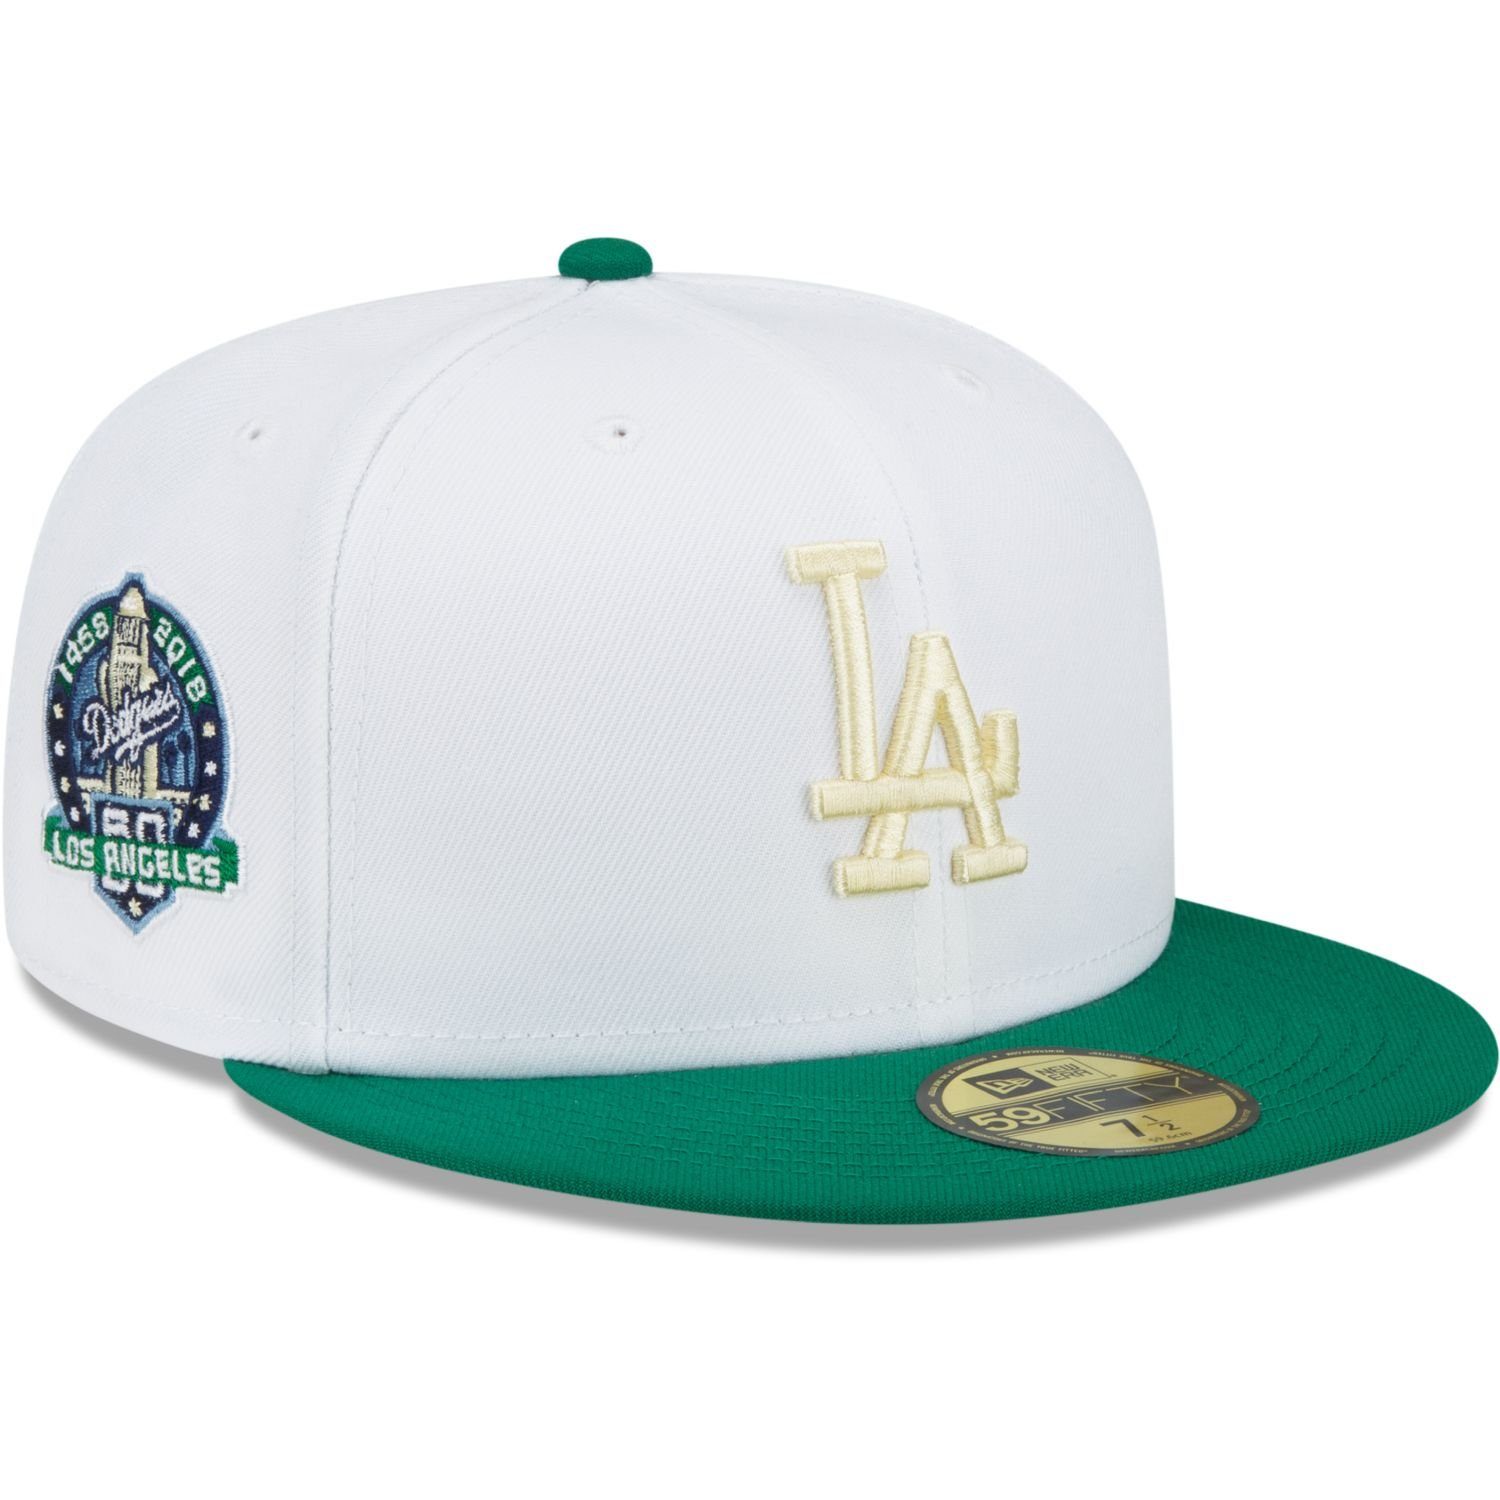 New Era Fitted Cap 59Fifty ANNIVERSARY Los Angeles Dodgers